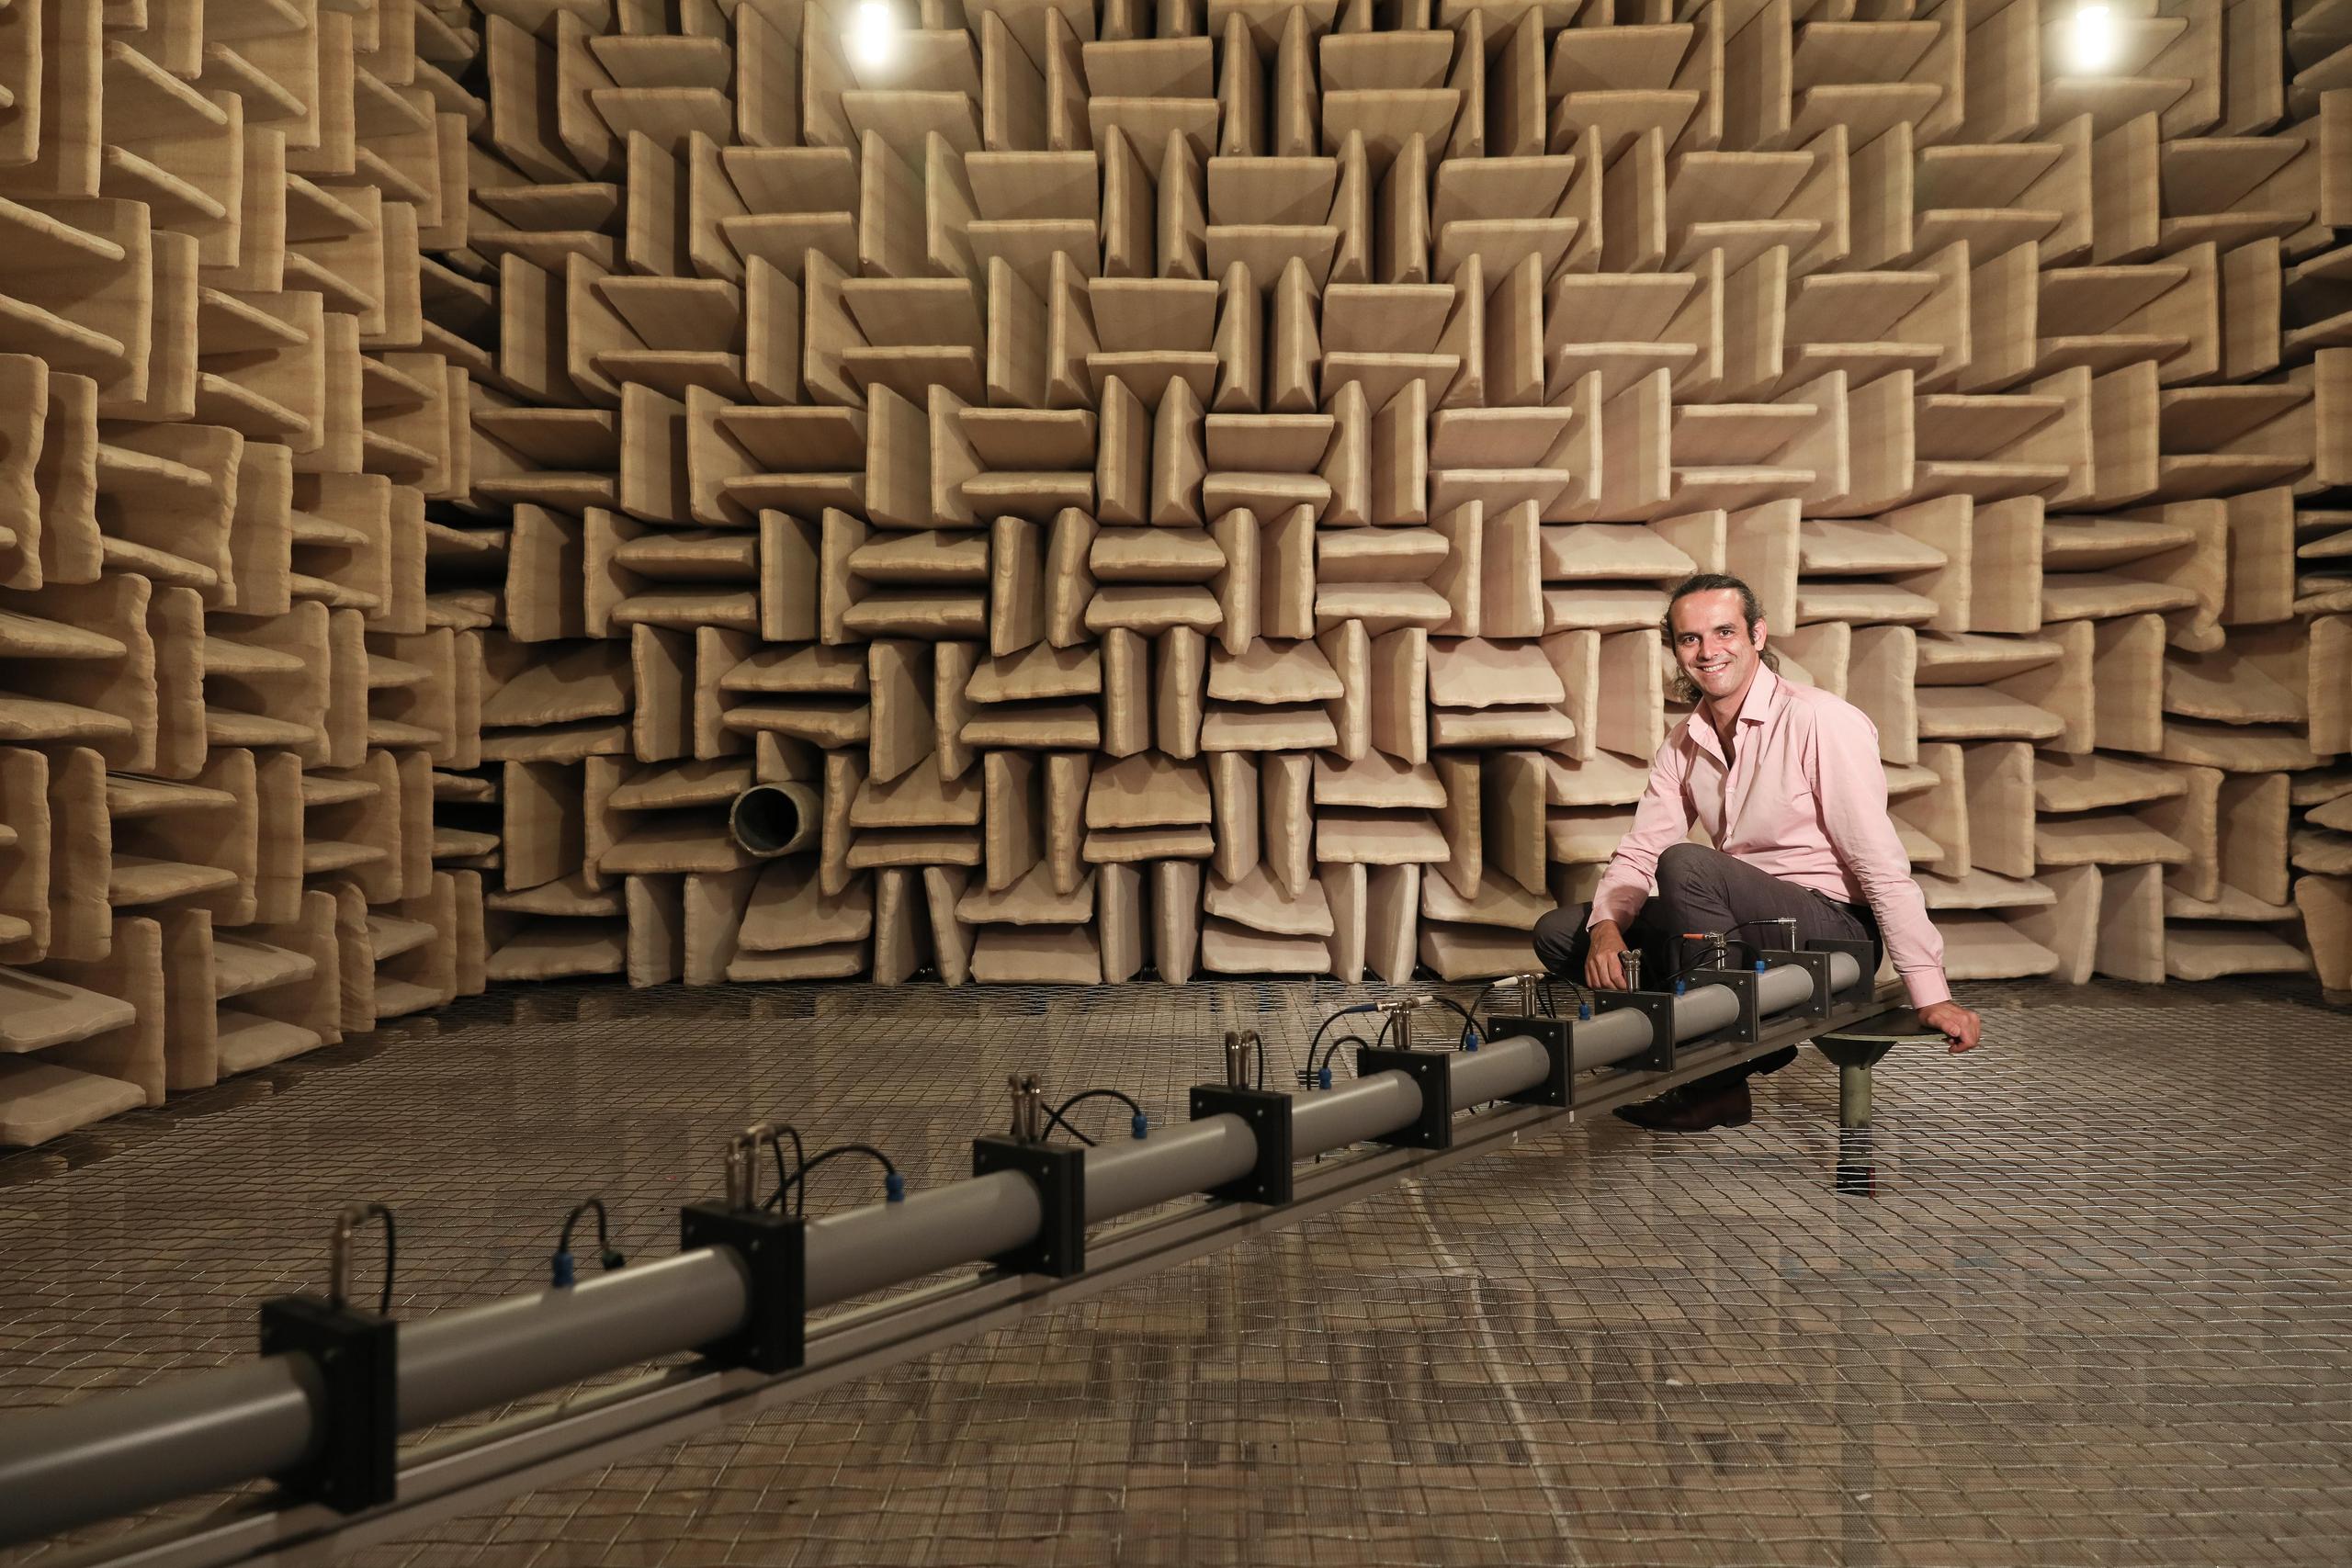 Hervé Lissek, head of the acoustics research group at EPFL’s Signal Processing Laboratory